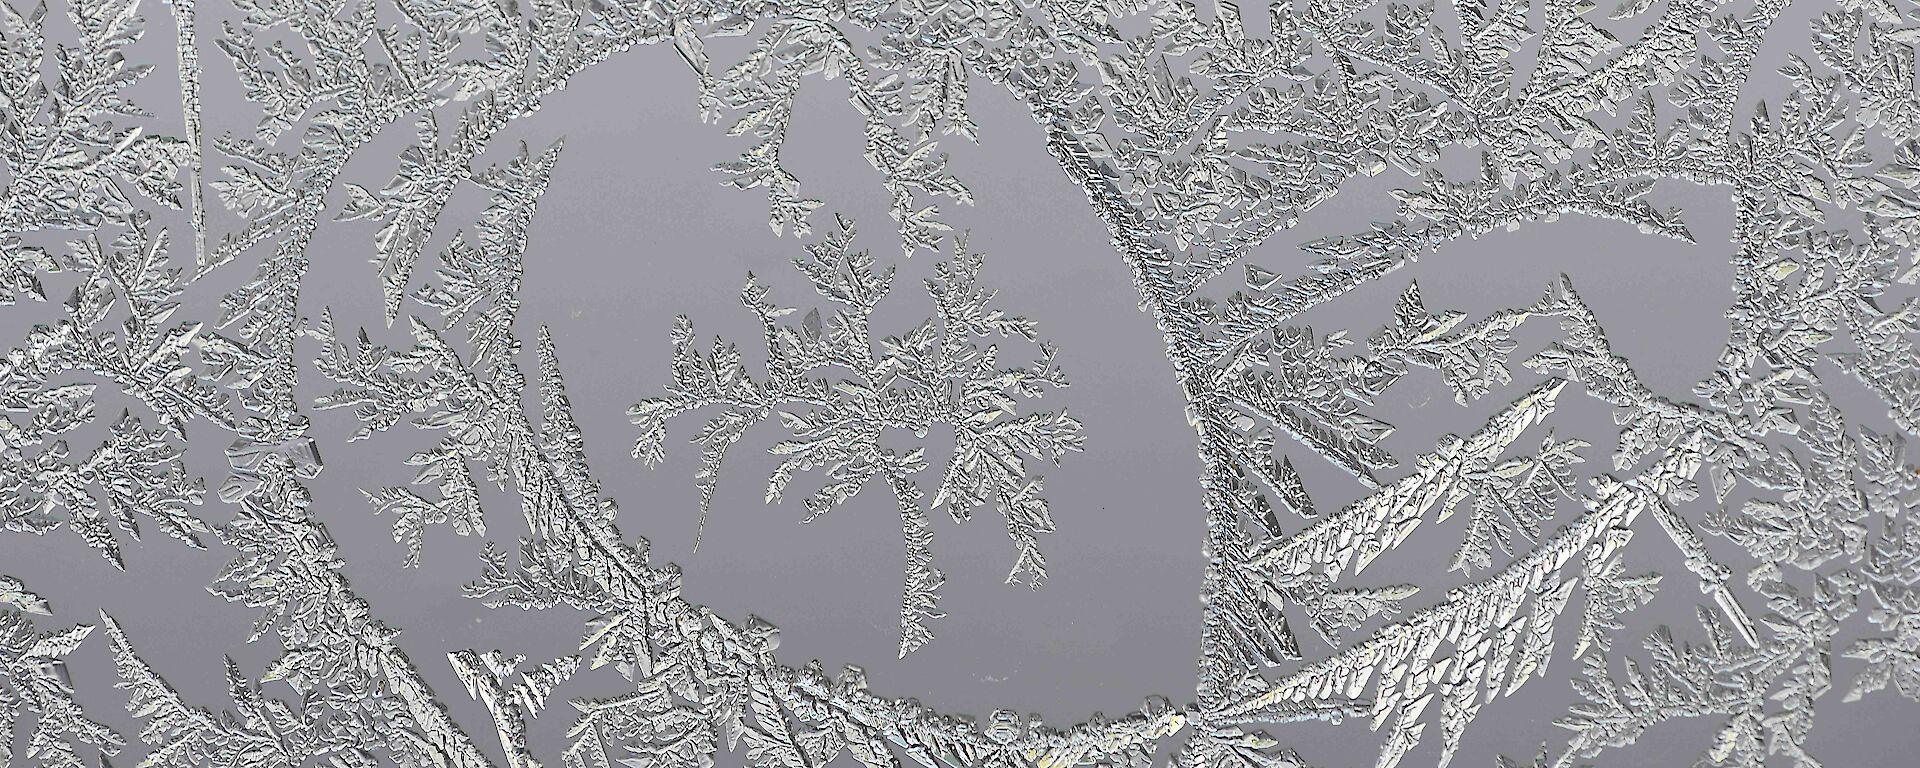 Ice crystals are of a leaf shape in a spiral